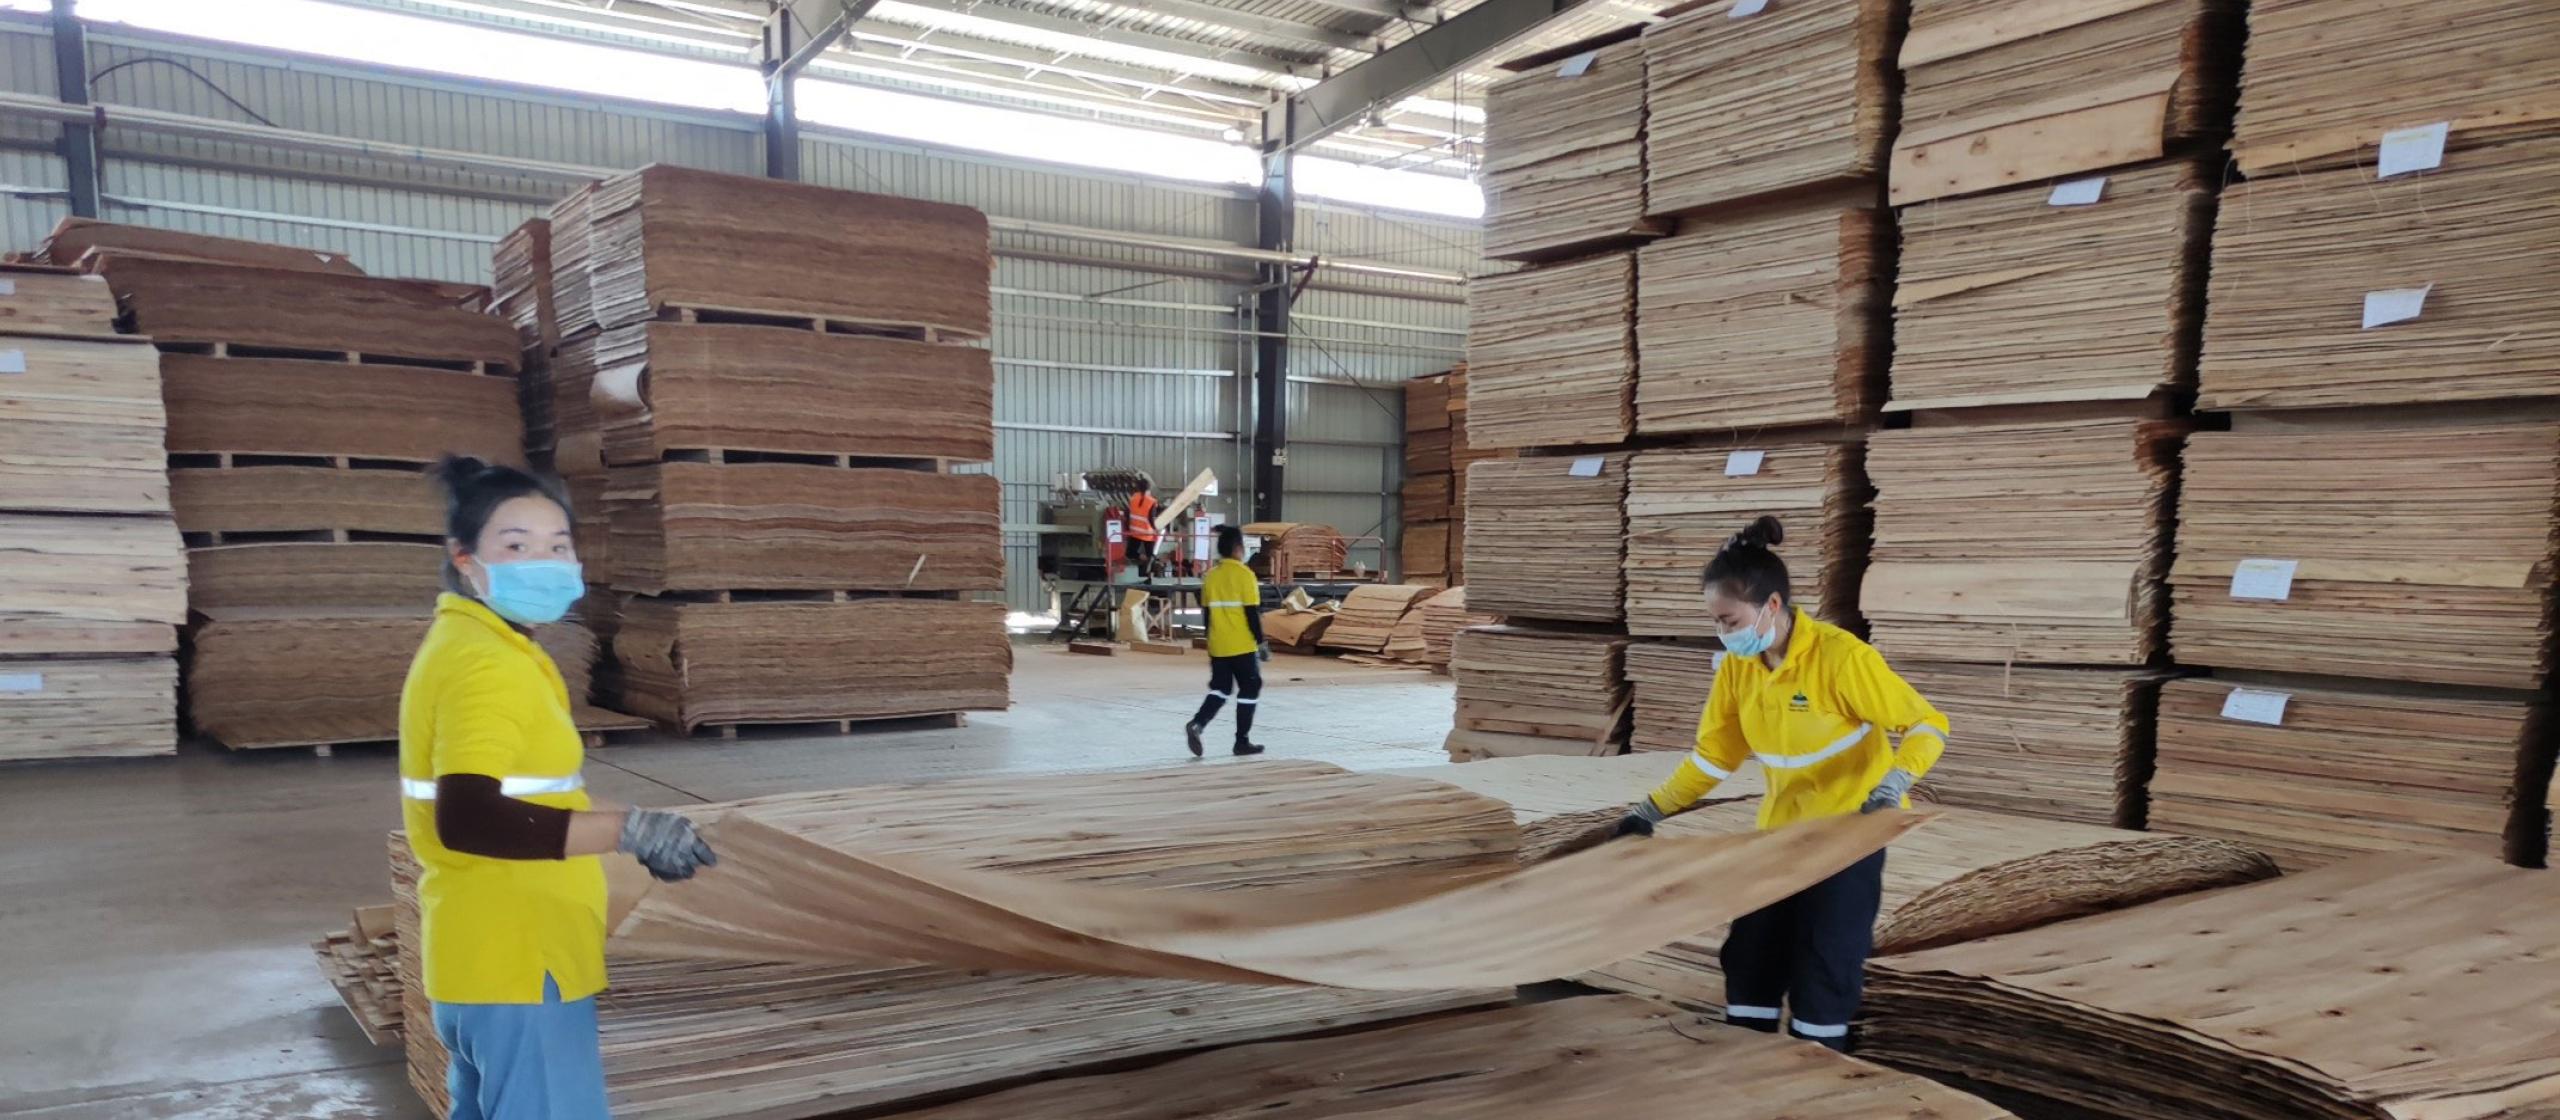 Two people holding a large sheet of timber in a timber warehouse